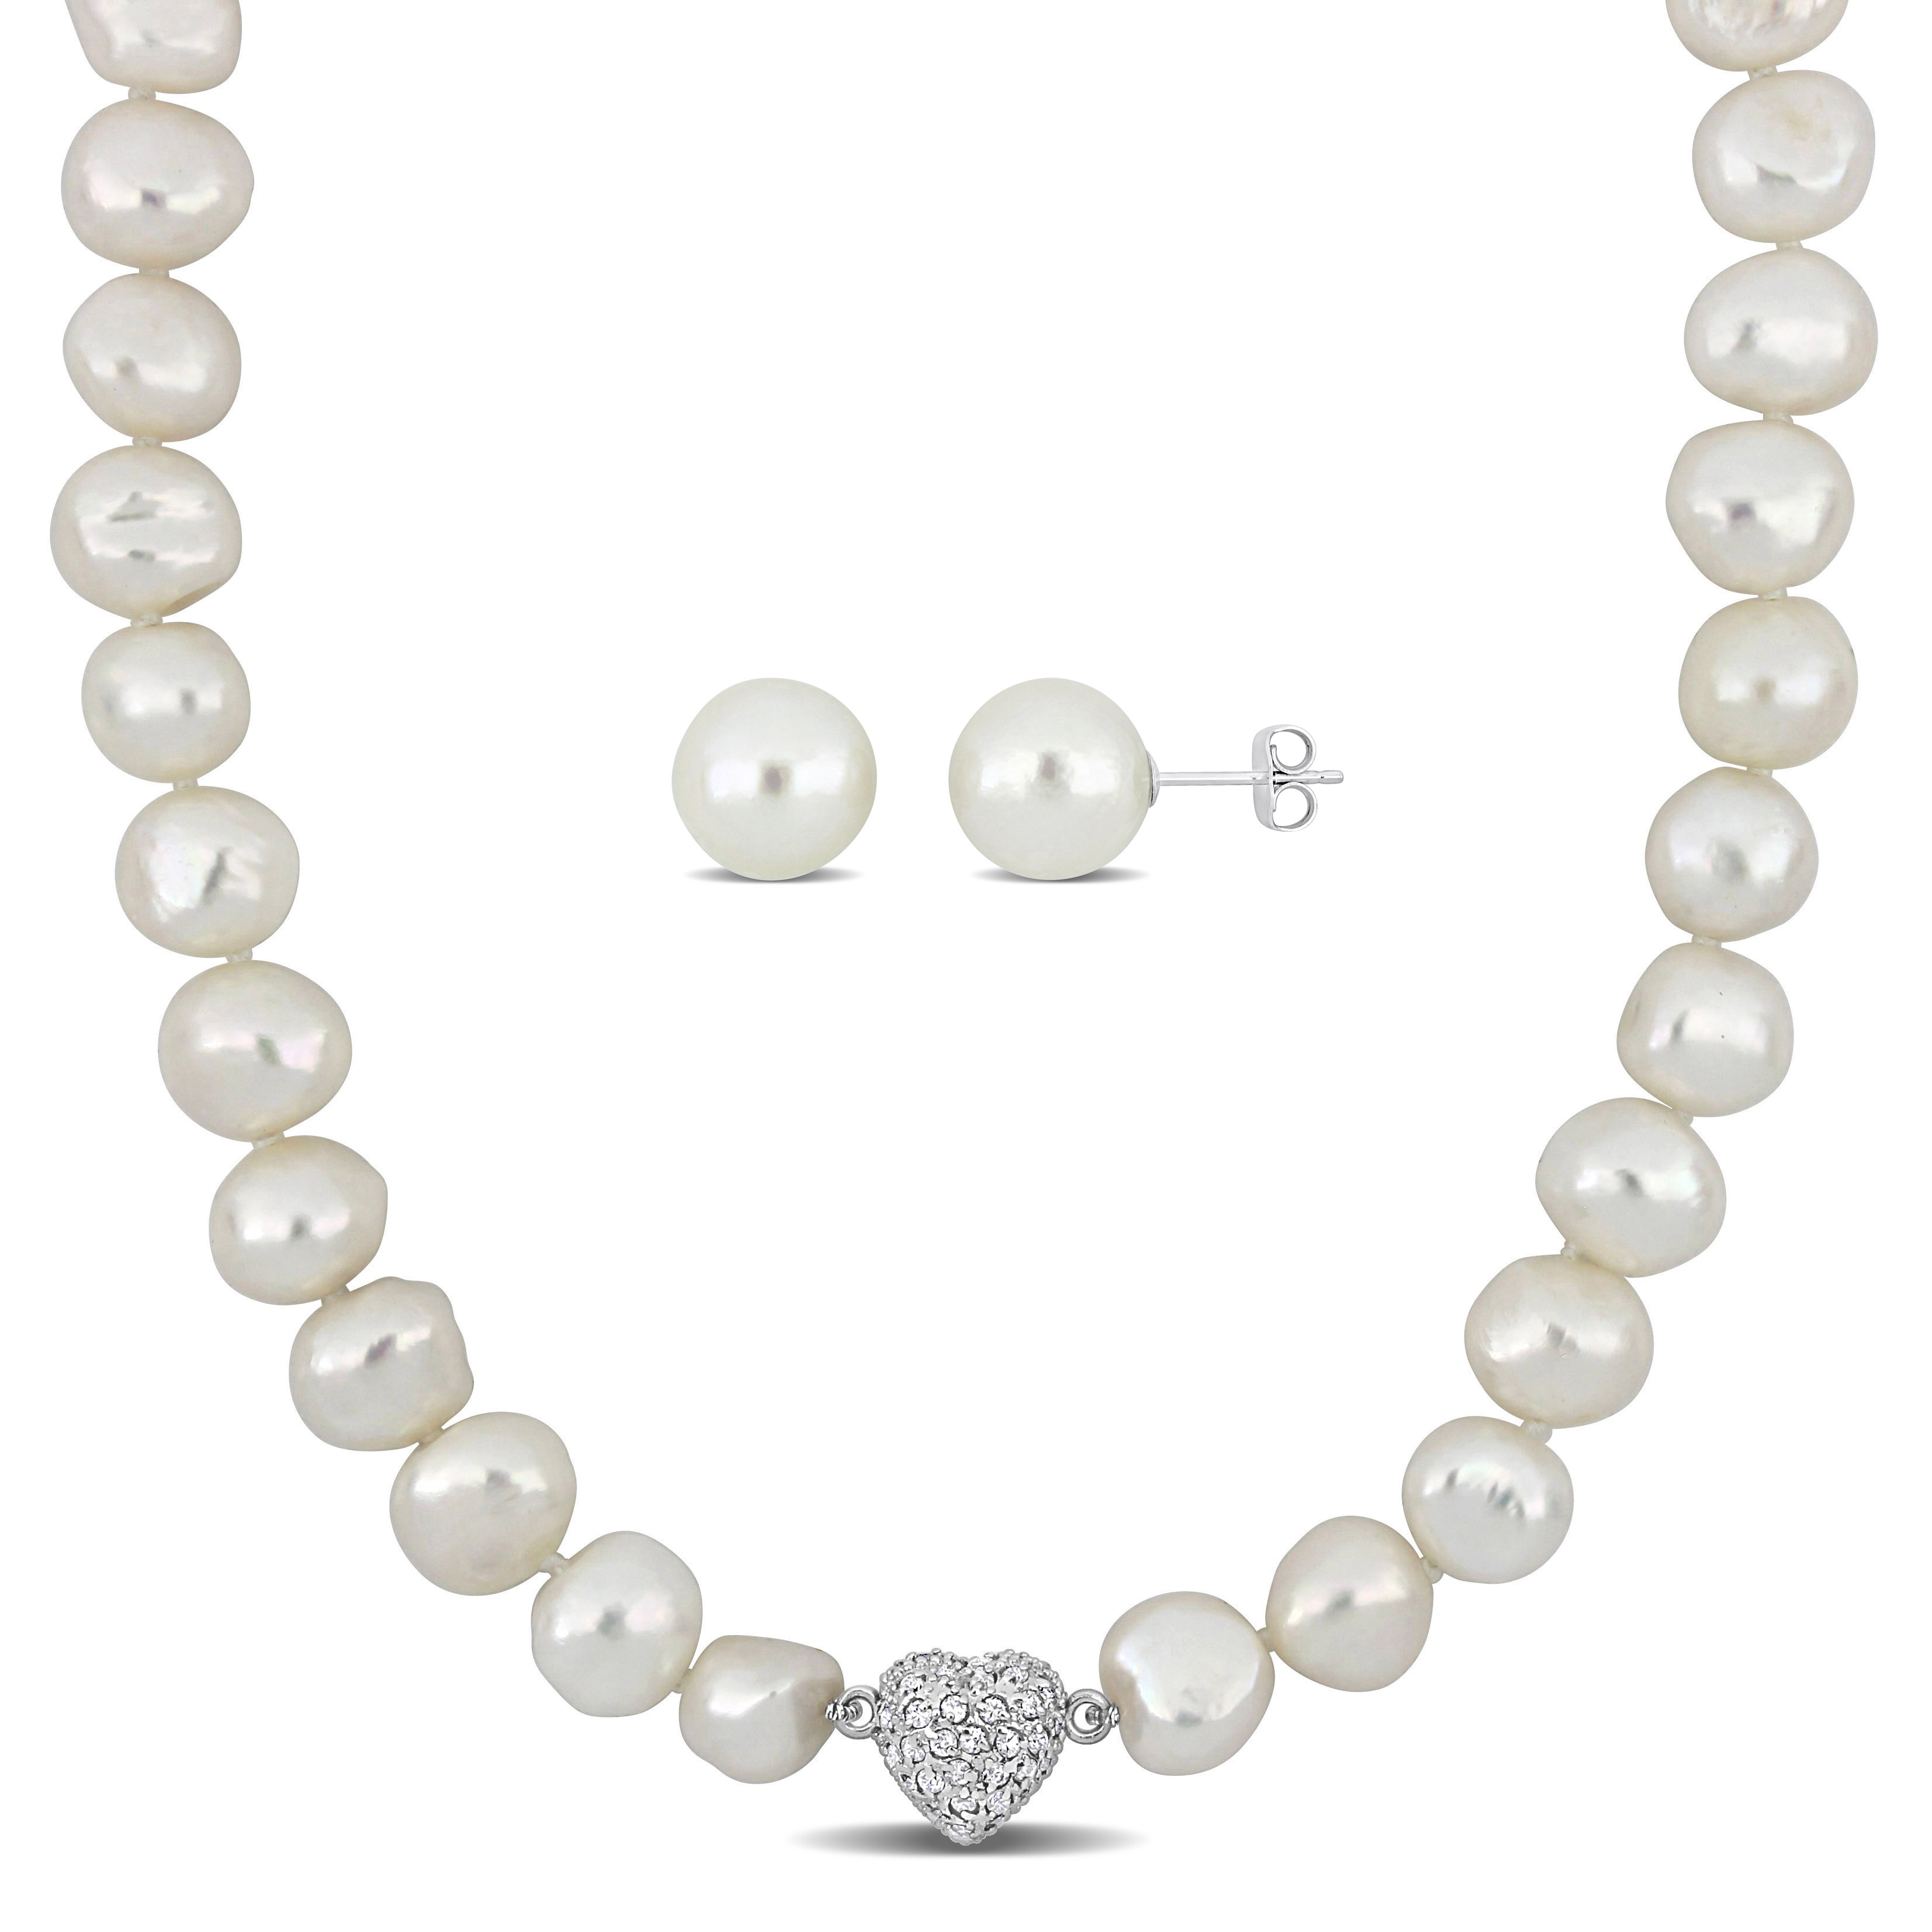 11-12 MM Cultured Freshwater Pearl Strand Necklace and Stud Earrings 2-Piece Set in Sterling Silver